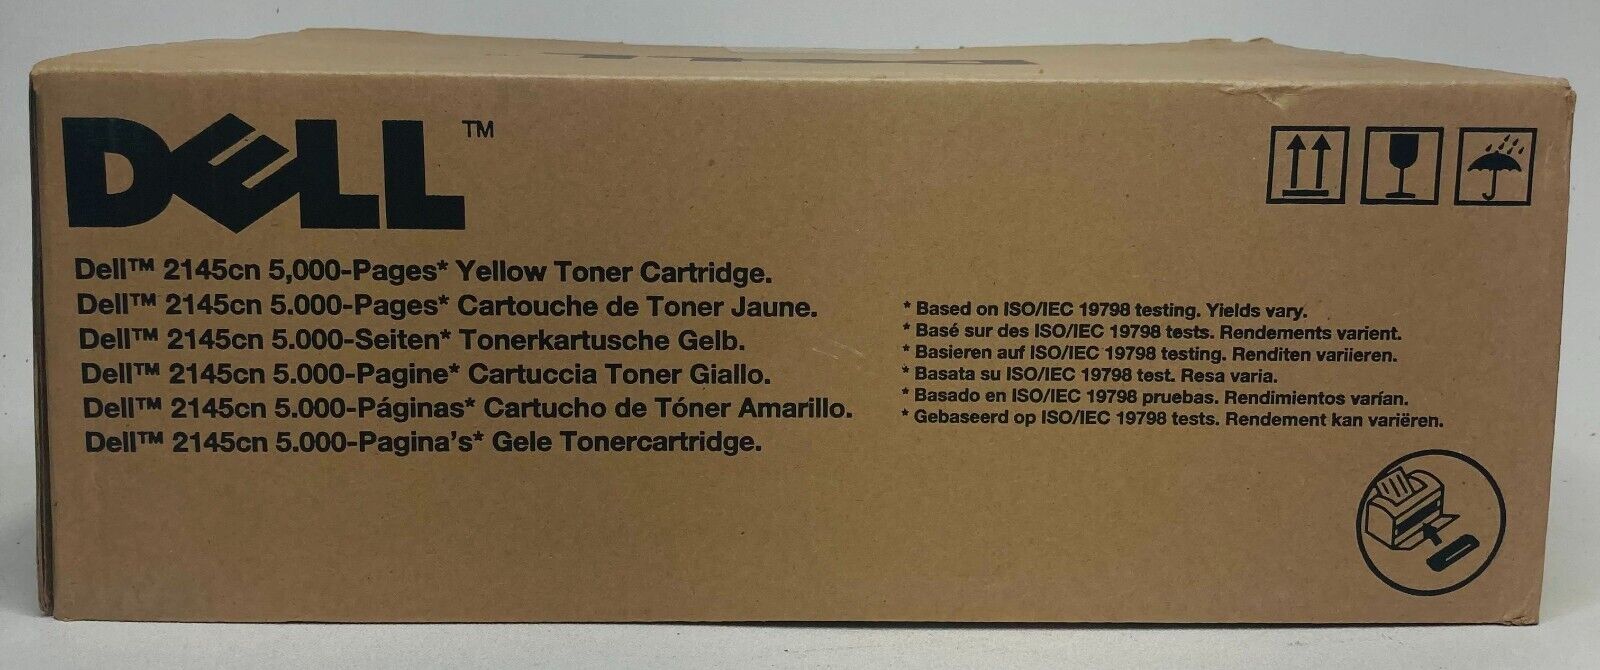 Genuine Dell 2145cn Toner Cartridge Yellow 5,000 Page High Yield Capacity SEALED